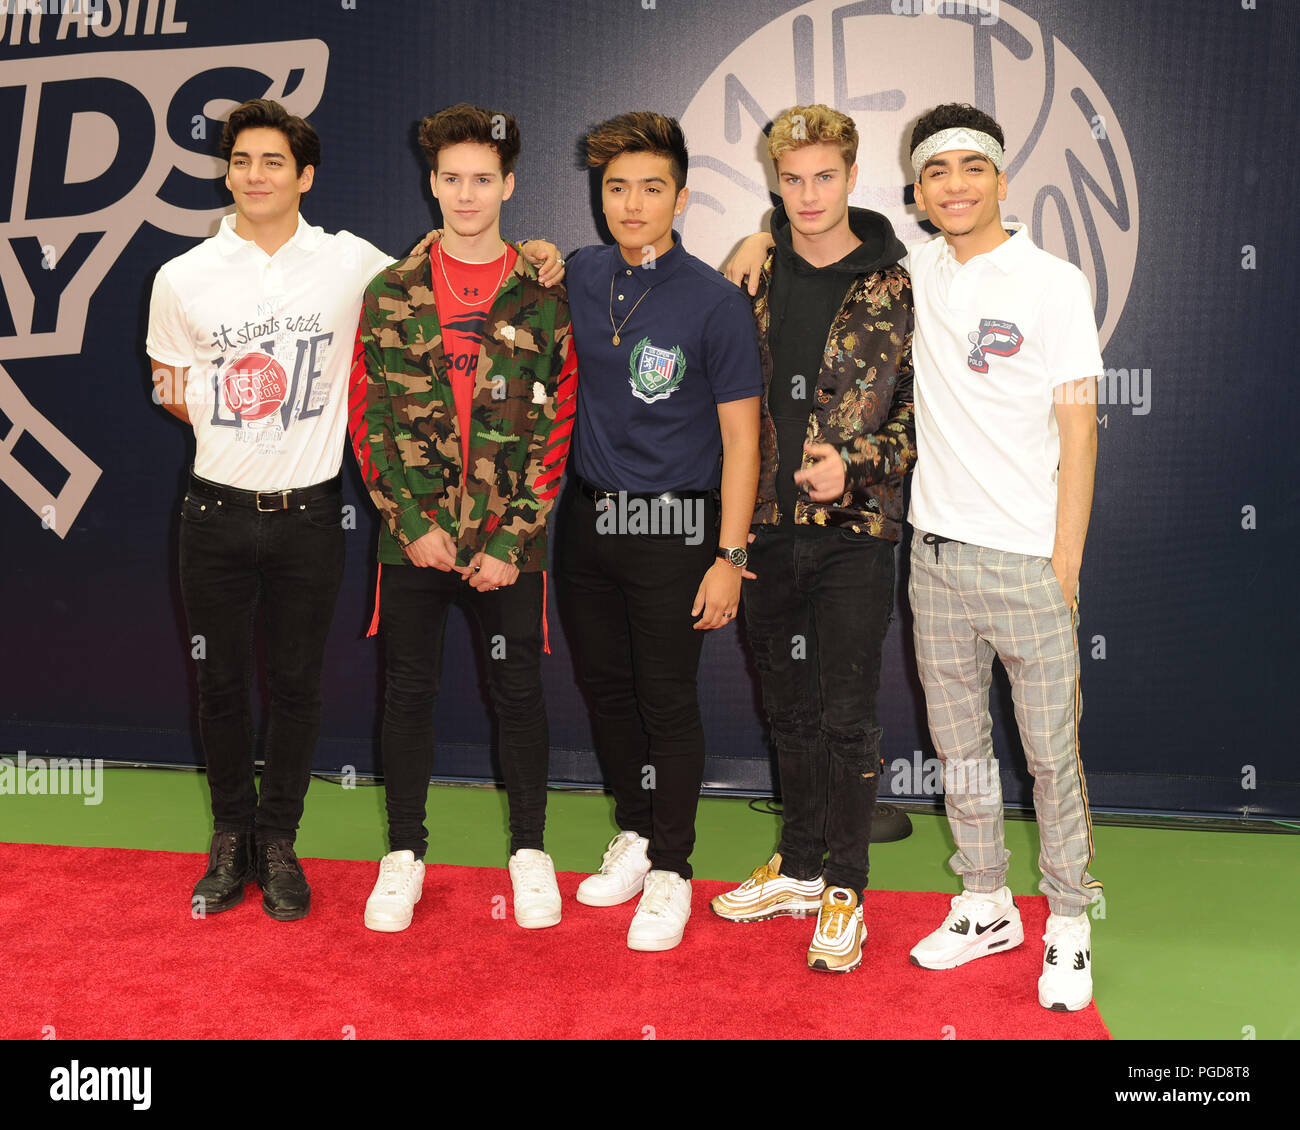 Flushing NY, USA. 25th Aug, 2018. Brady Tutton, Chance Perez, Drew Ramos, Sergio Calderon and Michael Conor of In Real Life attend Arthur Ashe Kids Day on Arthur Ashe Stadium at the USTA Billie Jean King National Tennis Center on August 25, 2018 in Flushing Queens. Credit: Mpi04/Media Punch ***No Ny Newspapers***/Alamy Live News Stock Photo